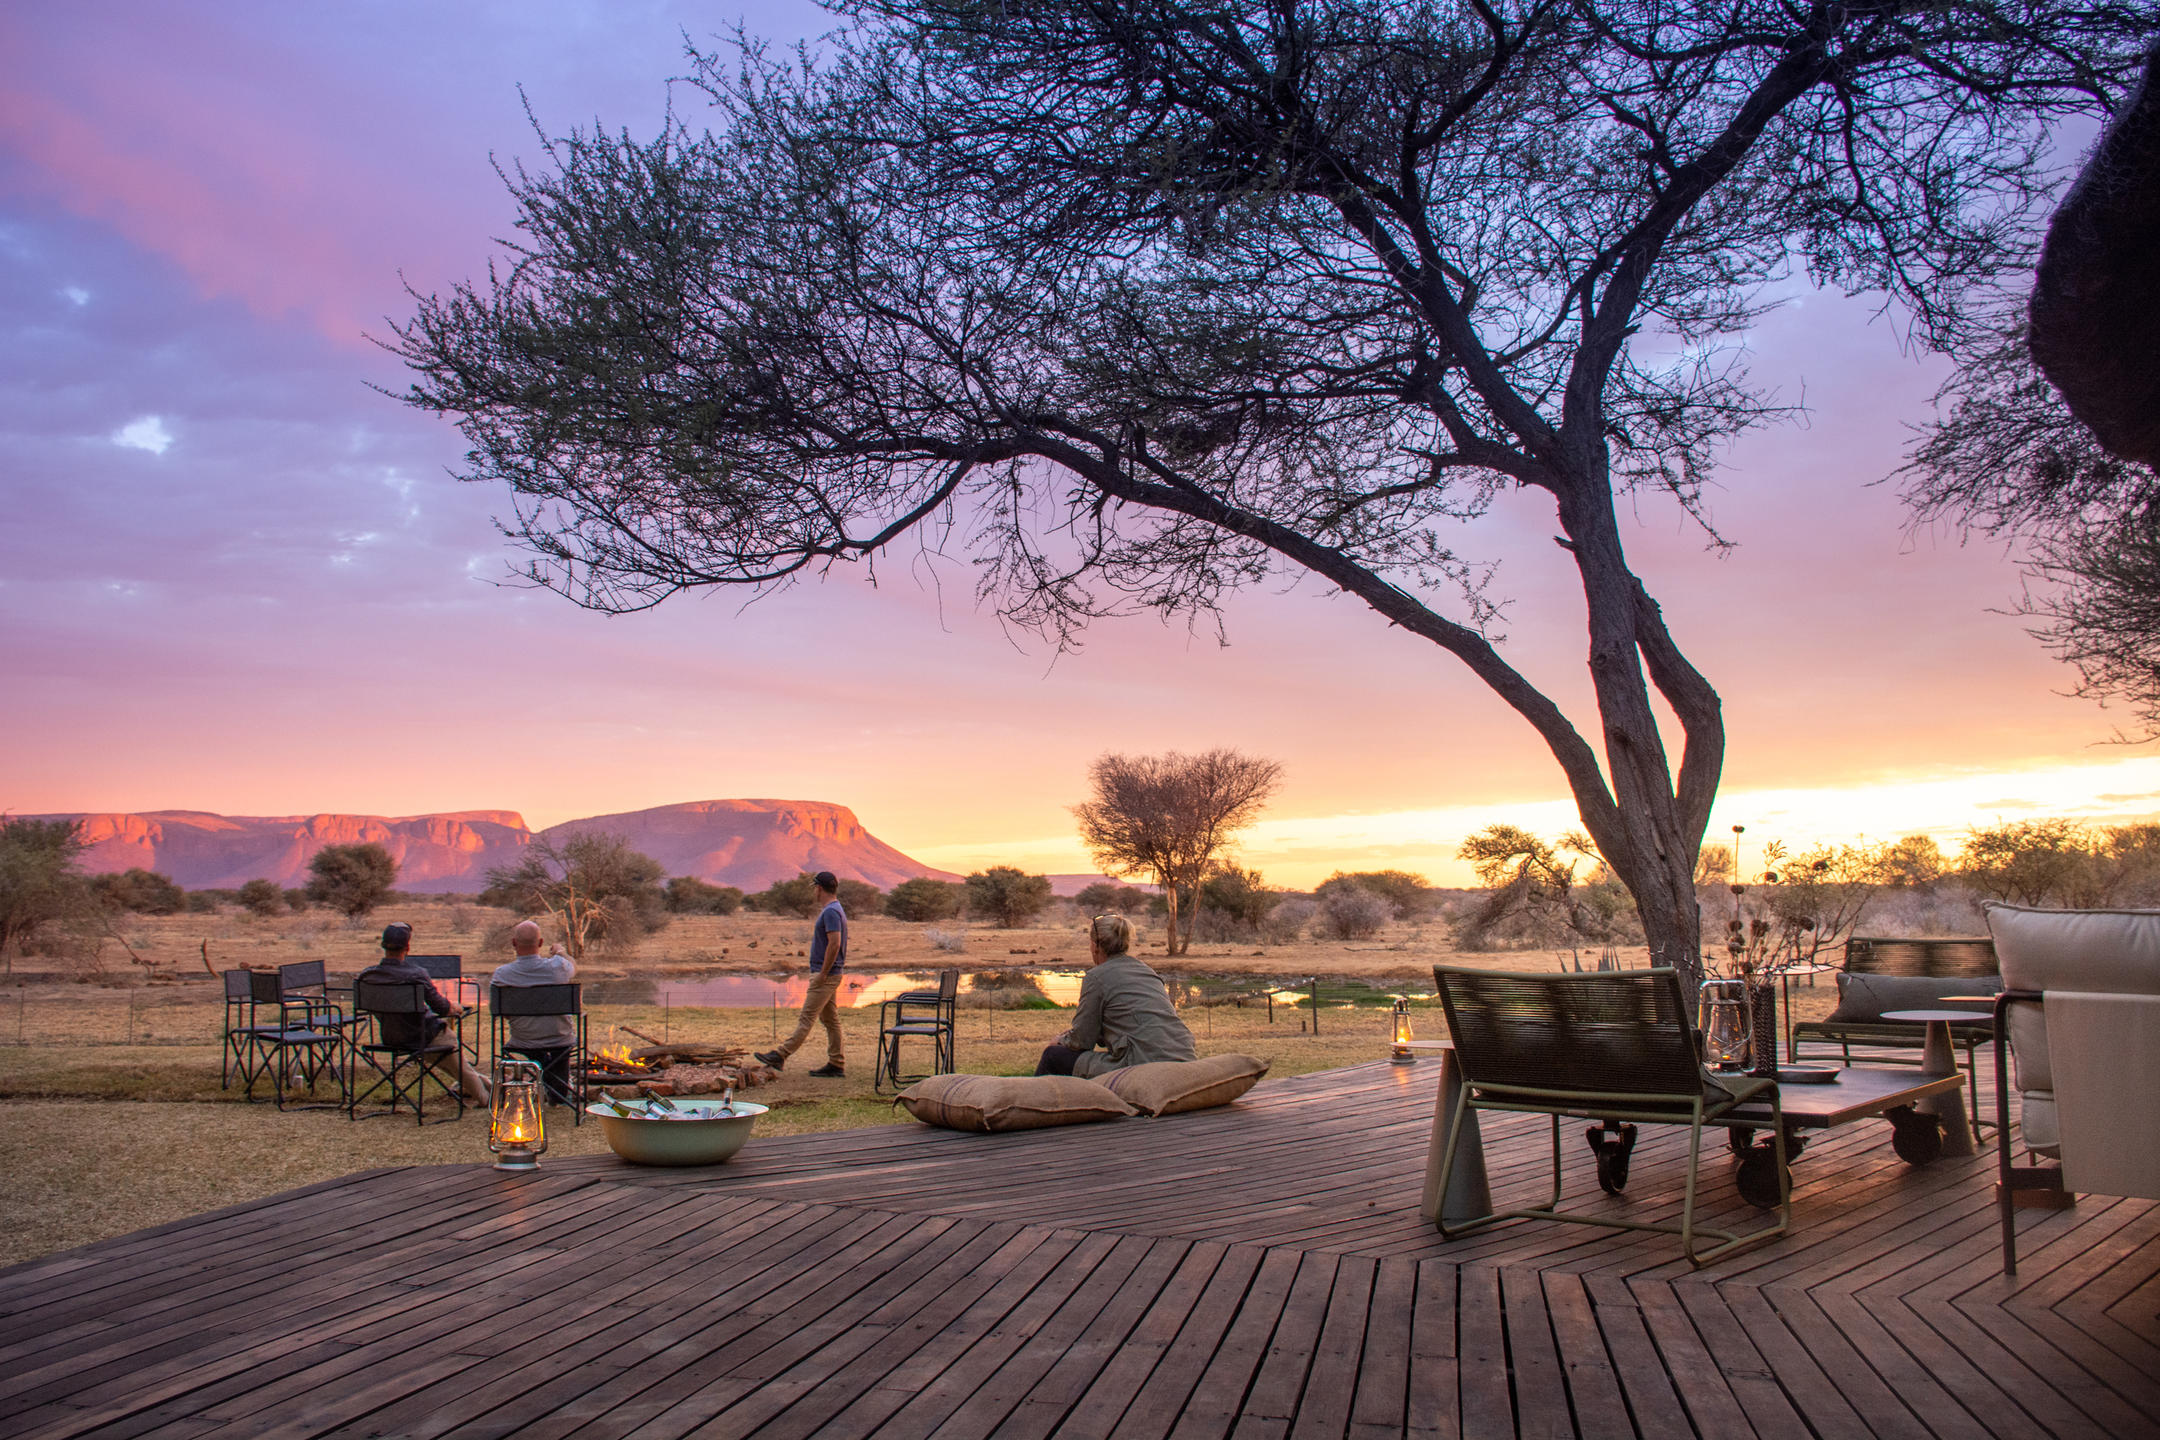 Marataba Conservation Camps has opened new retreats in a new section of the Marakele National Park in South Africa's Limpopo Province. 